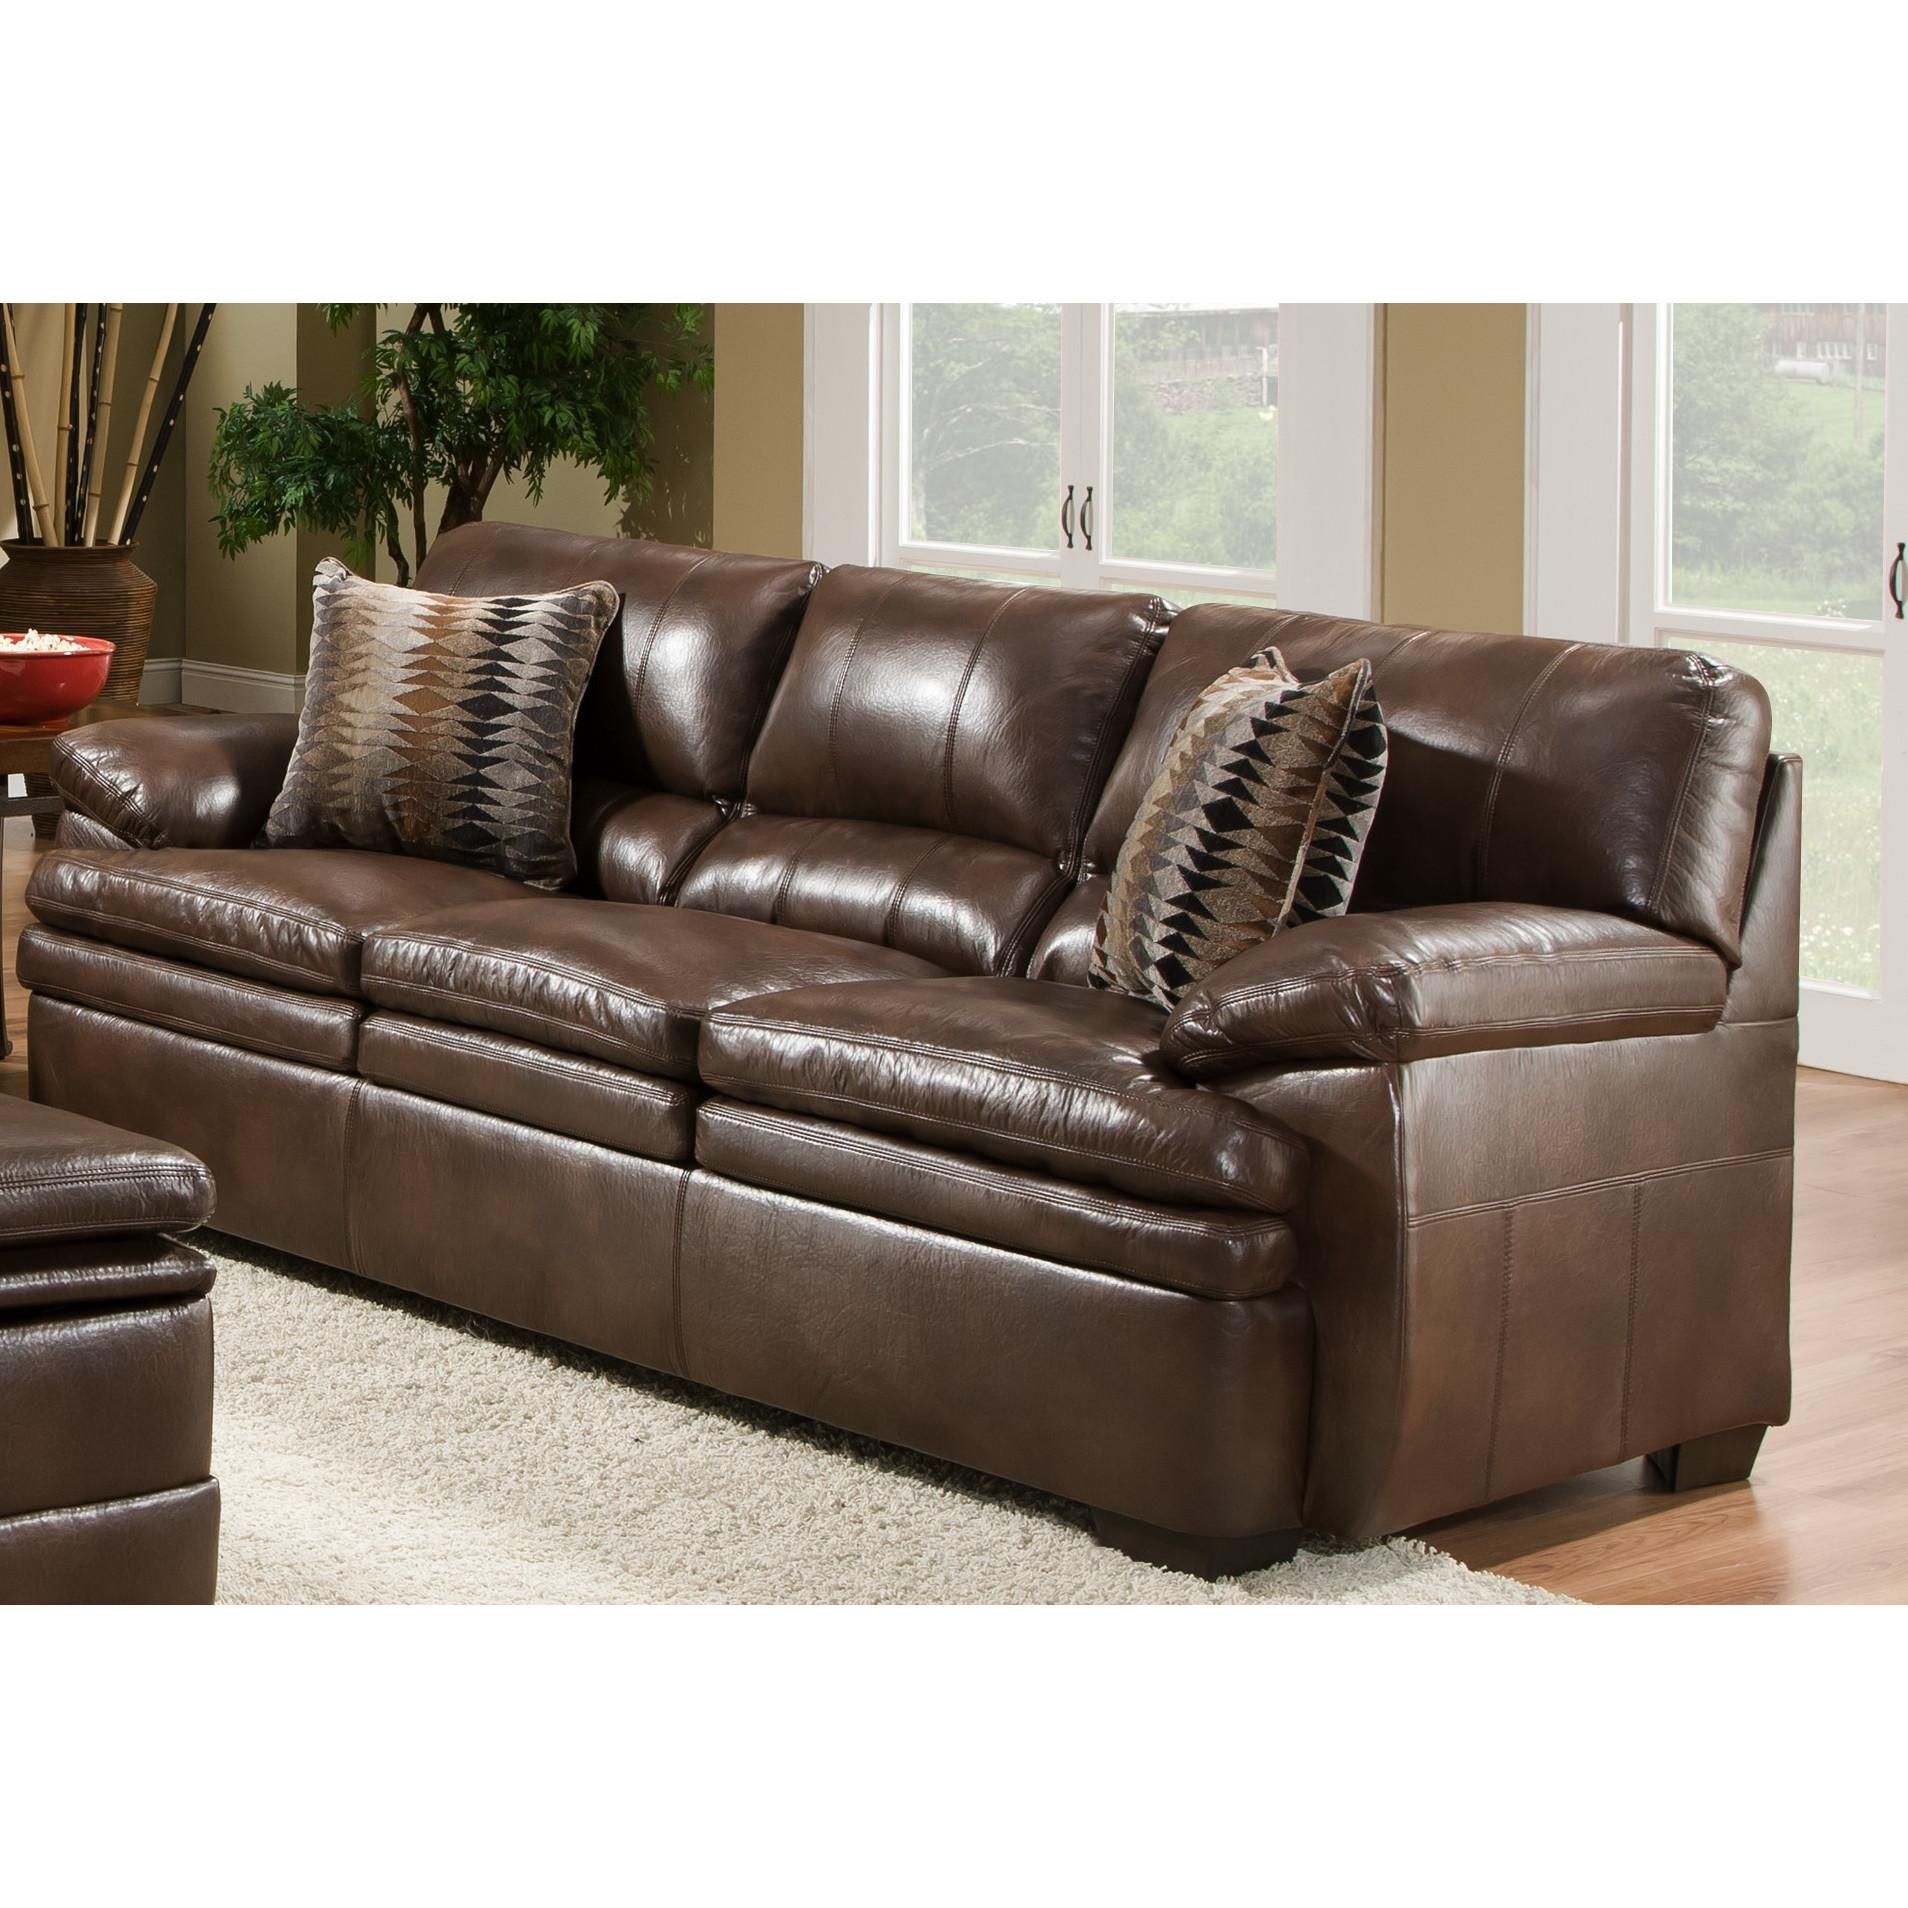 Simmons Leather Sofa With Inspiration Hd Pictures 7276 | Kengire Inside Simmons Leather Sofas And Loveseats (Photo 18 of 20)